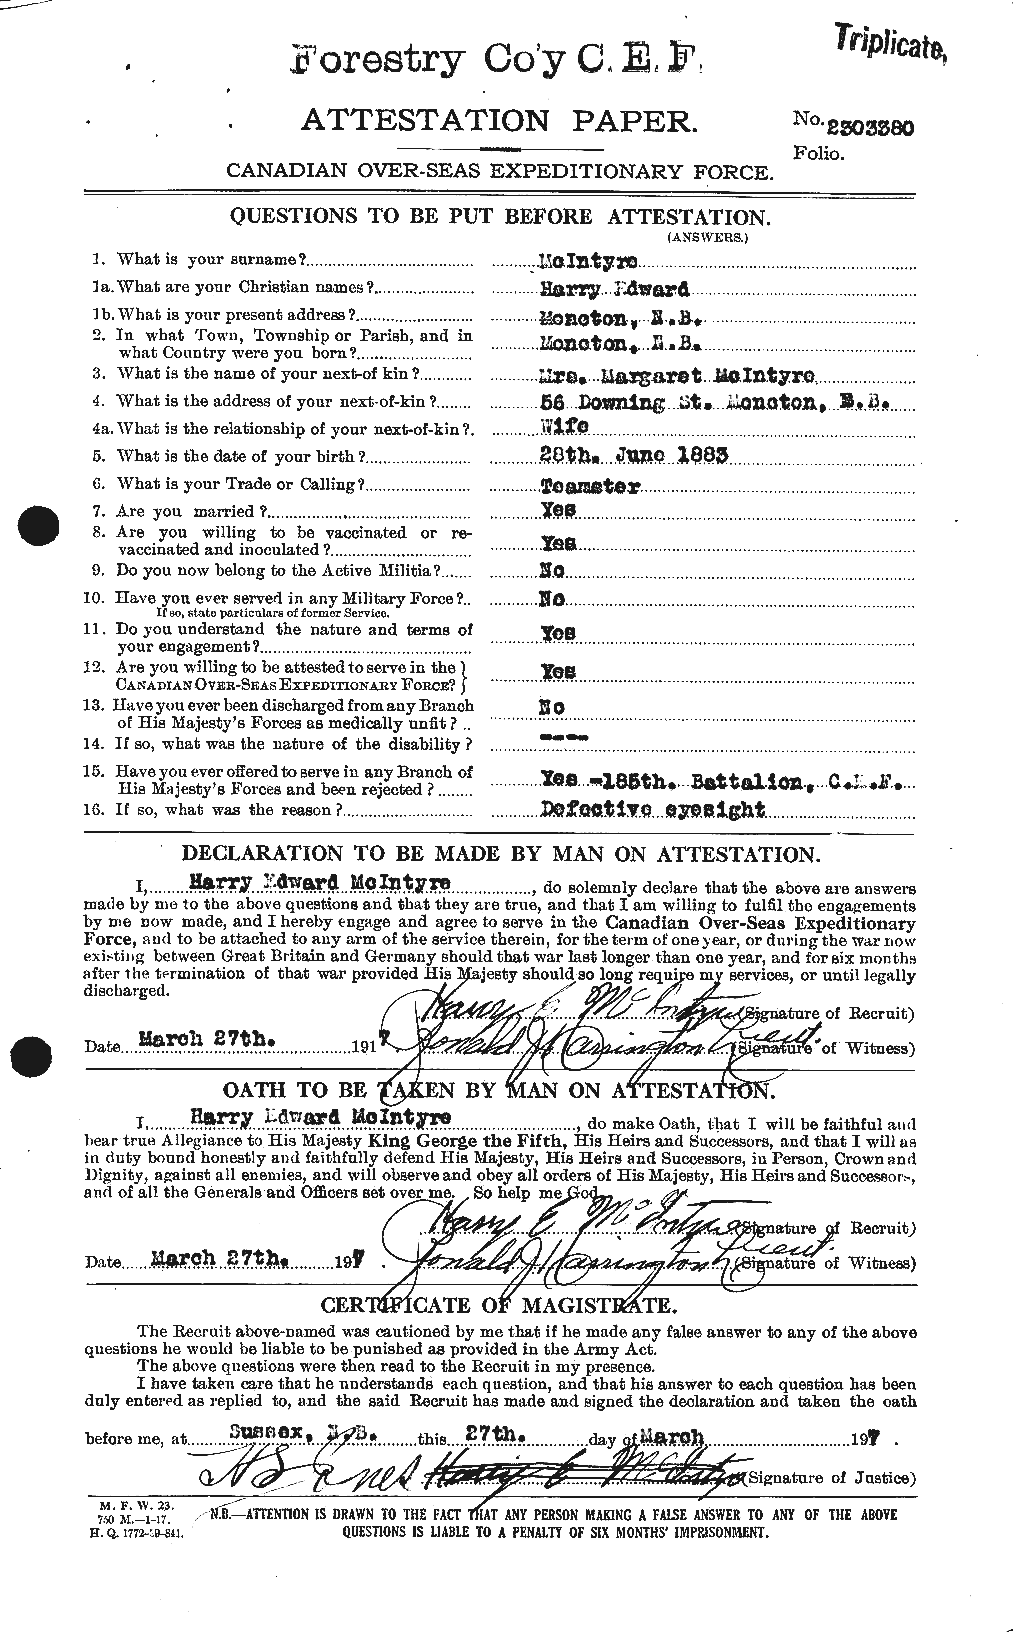 Personnel Records of the First World War - CEF 527415a